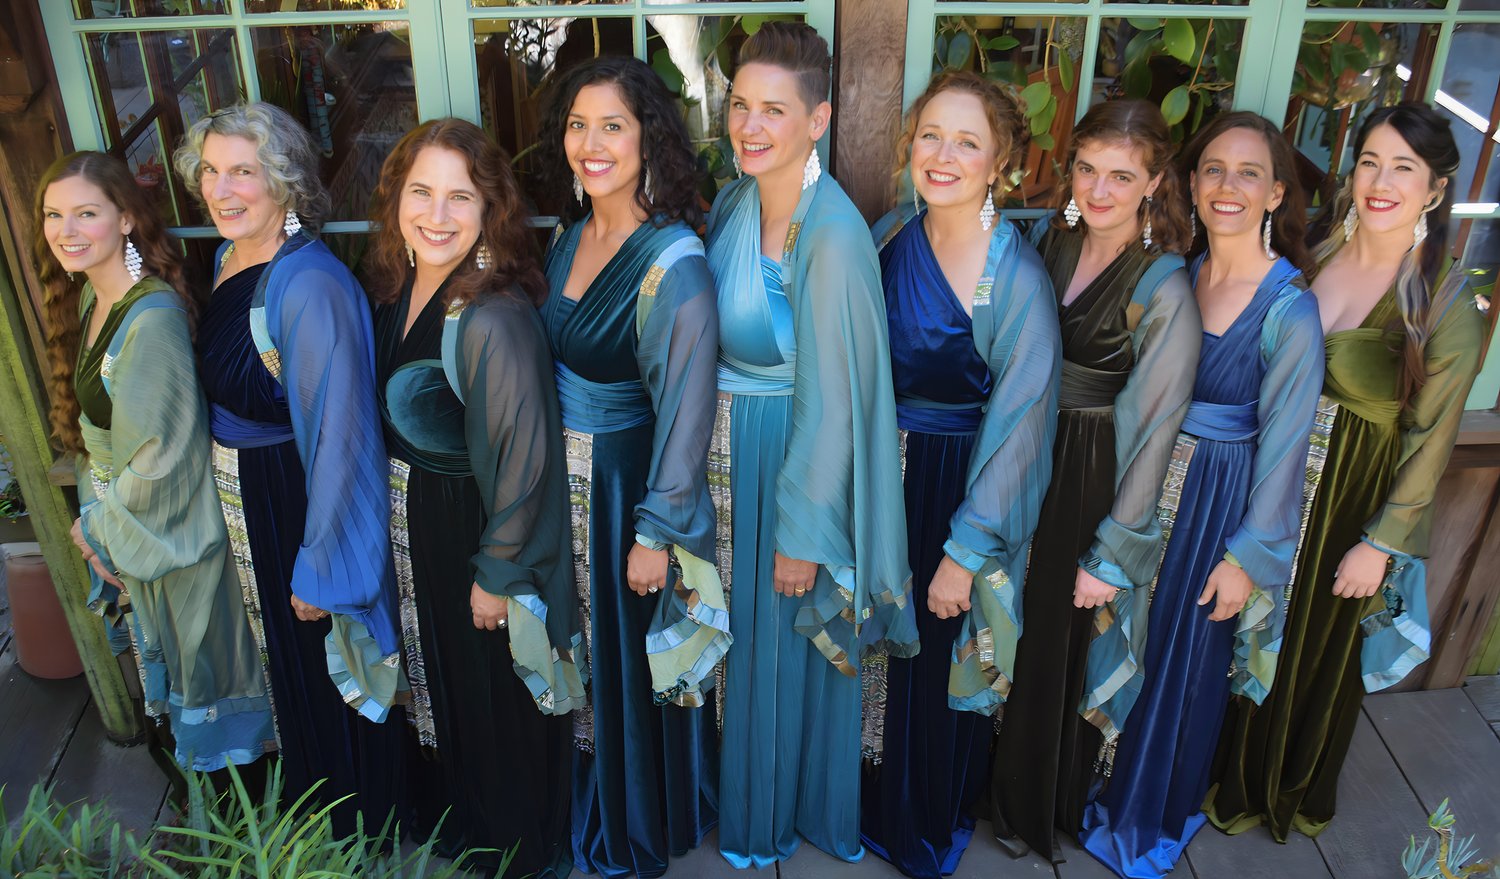 Wintersongs with Kitka - MENLO PARK Tickets, Sun, Dec 10, 2023 at 4:00 PM